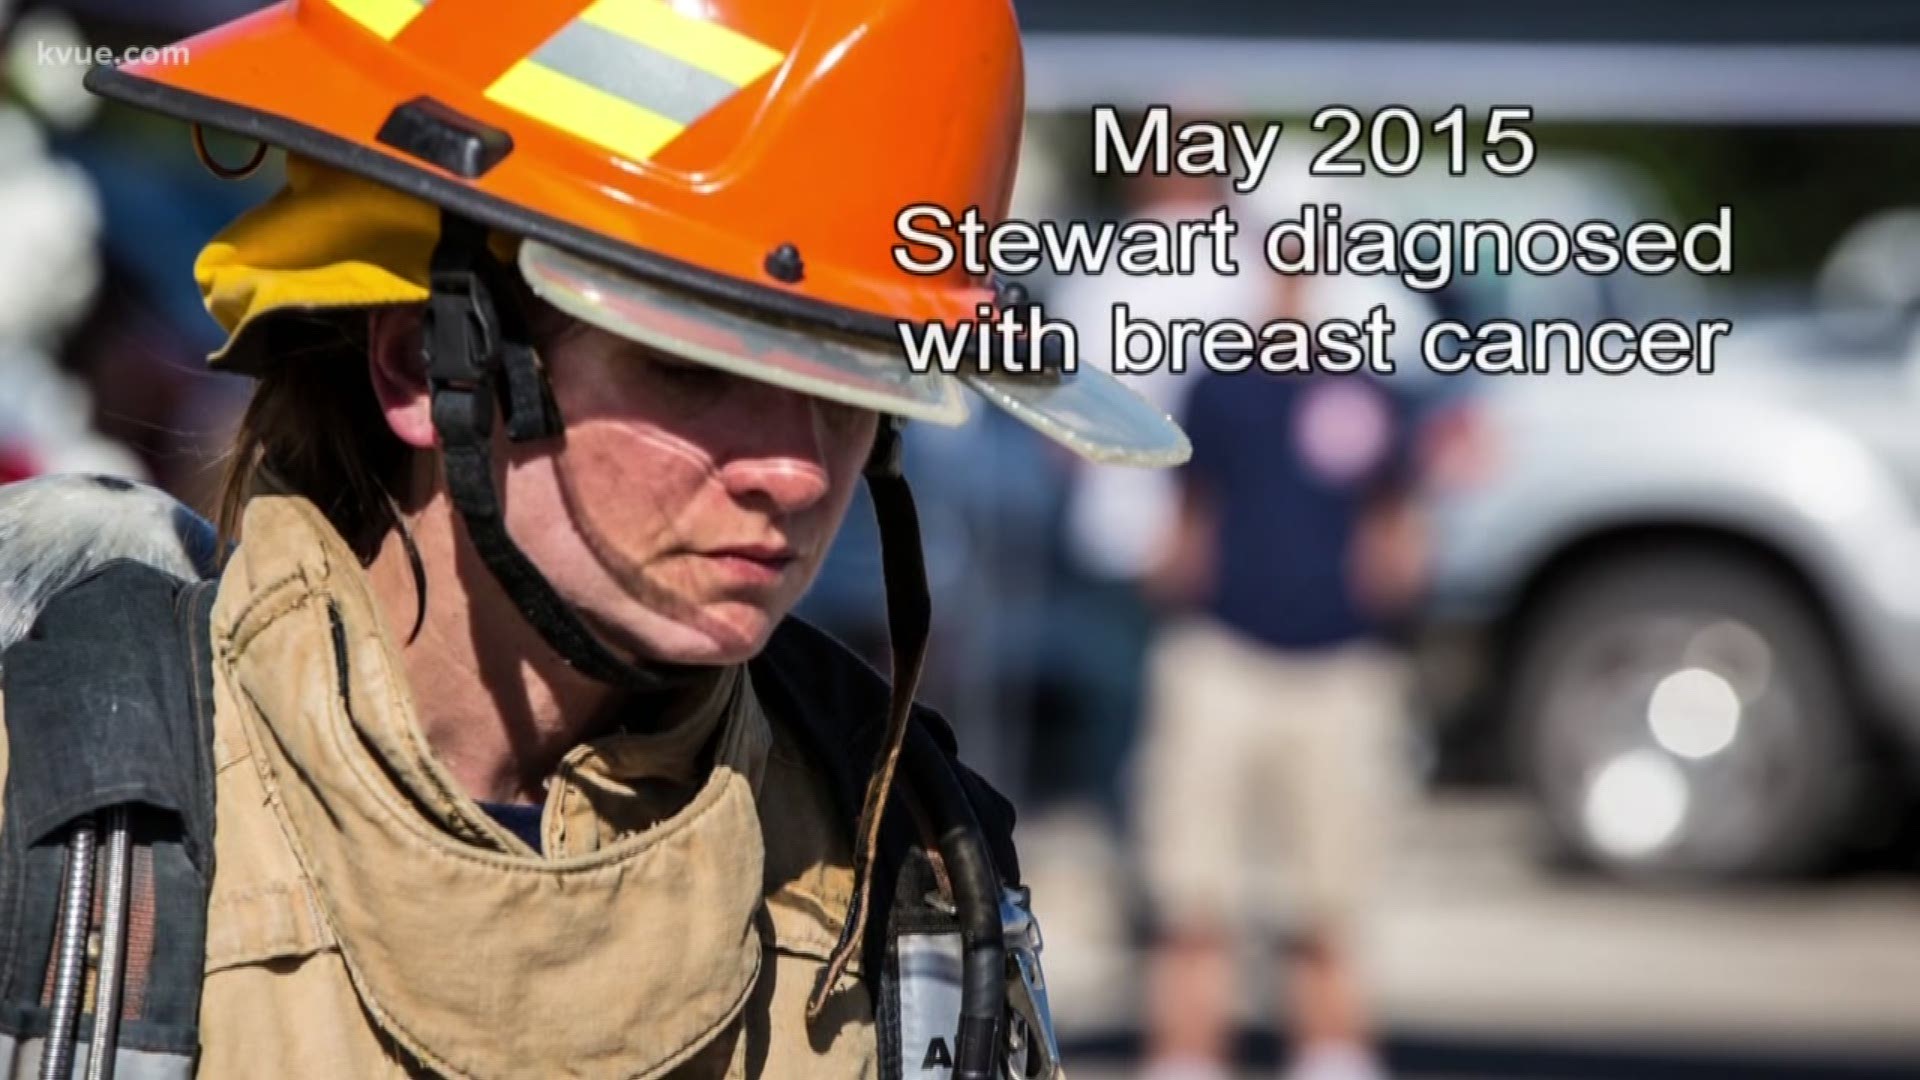 The City was ordered to pay for the firefighter's breast cancer care in 2016 under the belief that shift work could be considered a carcinogen.